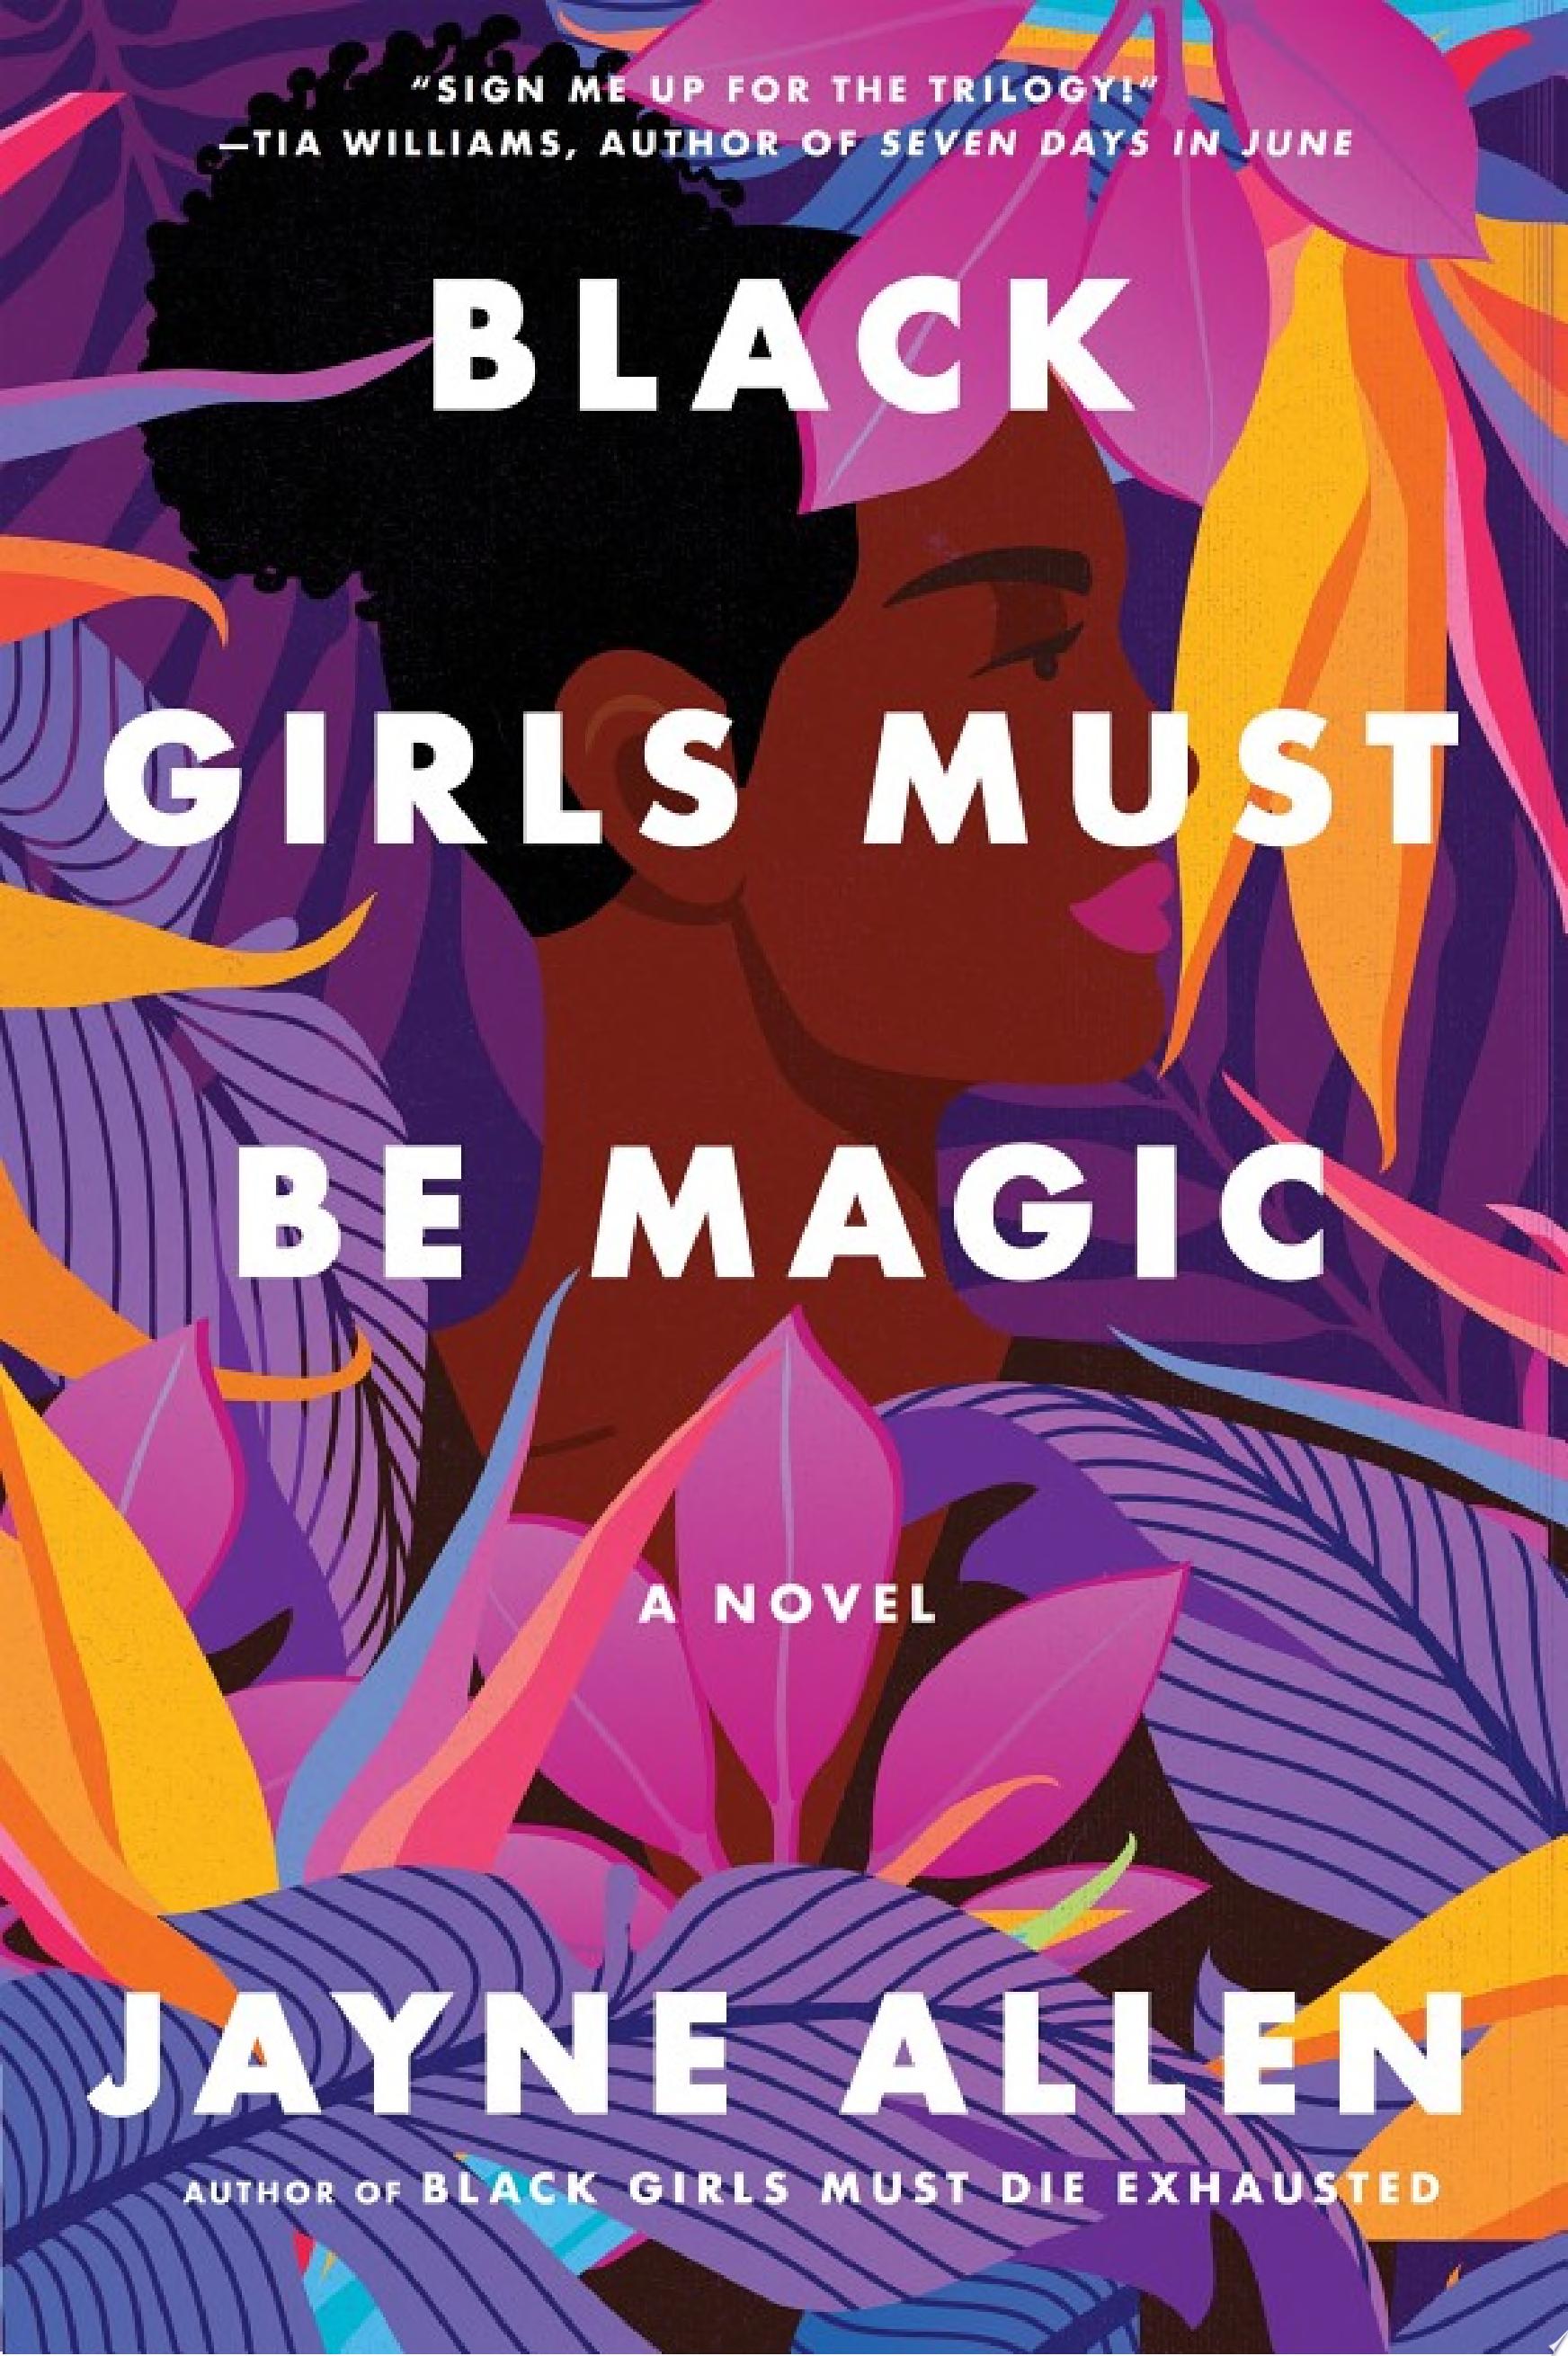 Image for "Black Girls Must Be Magic"